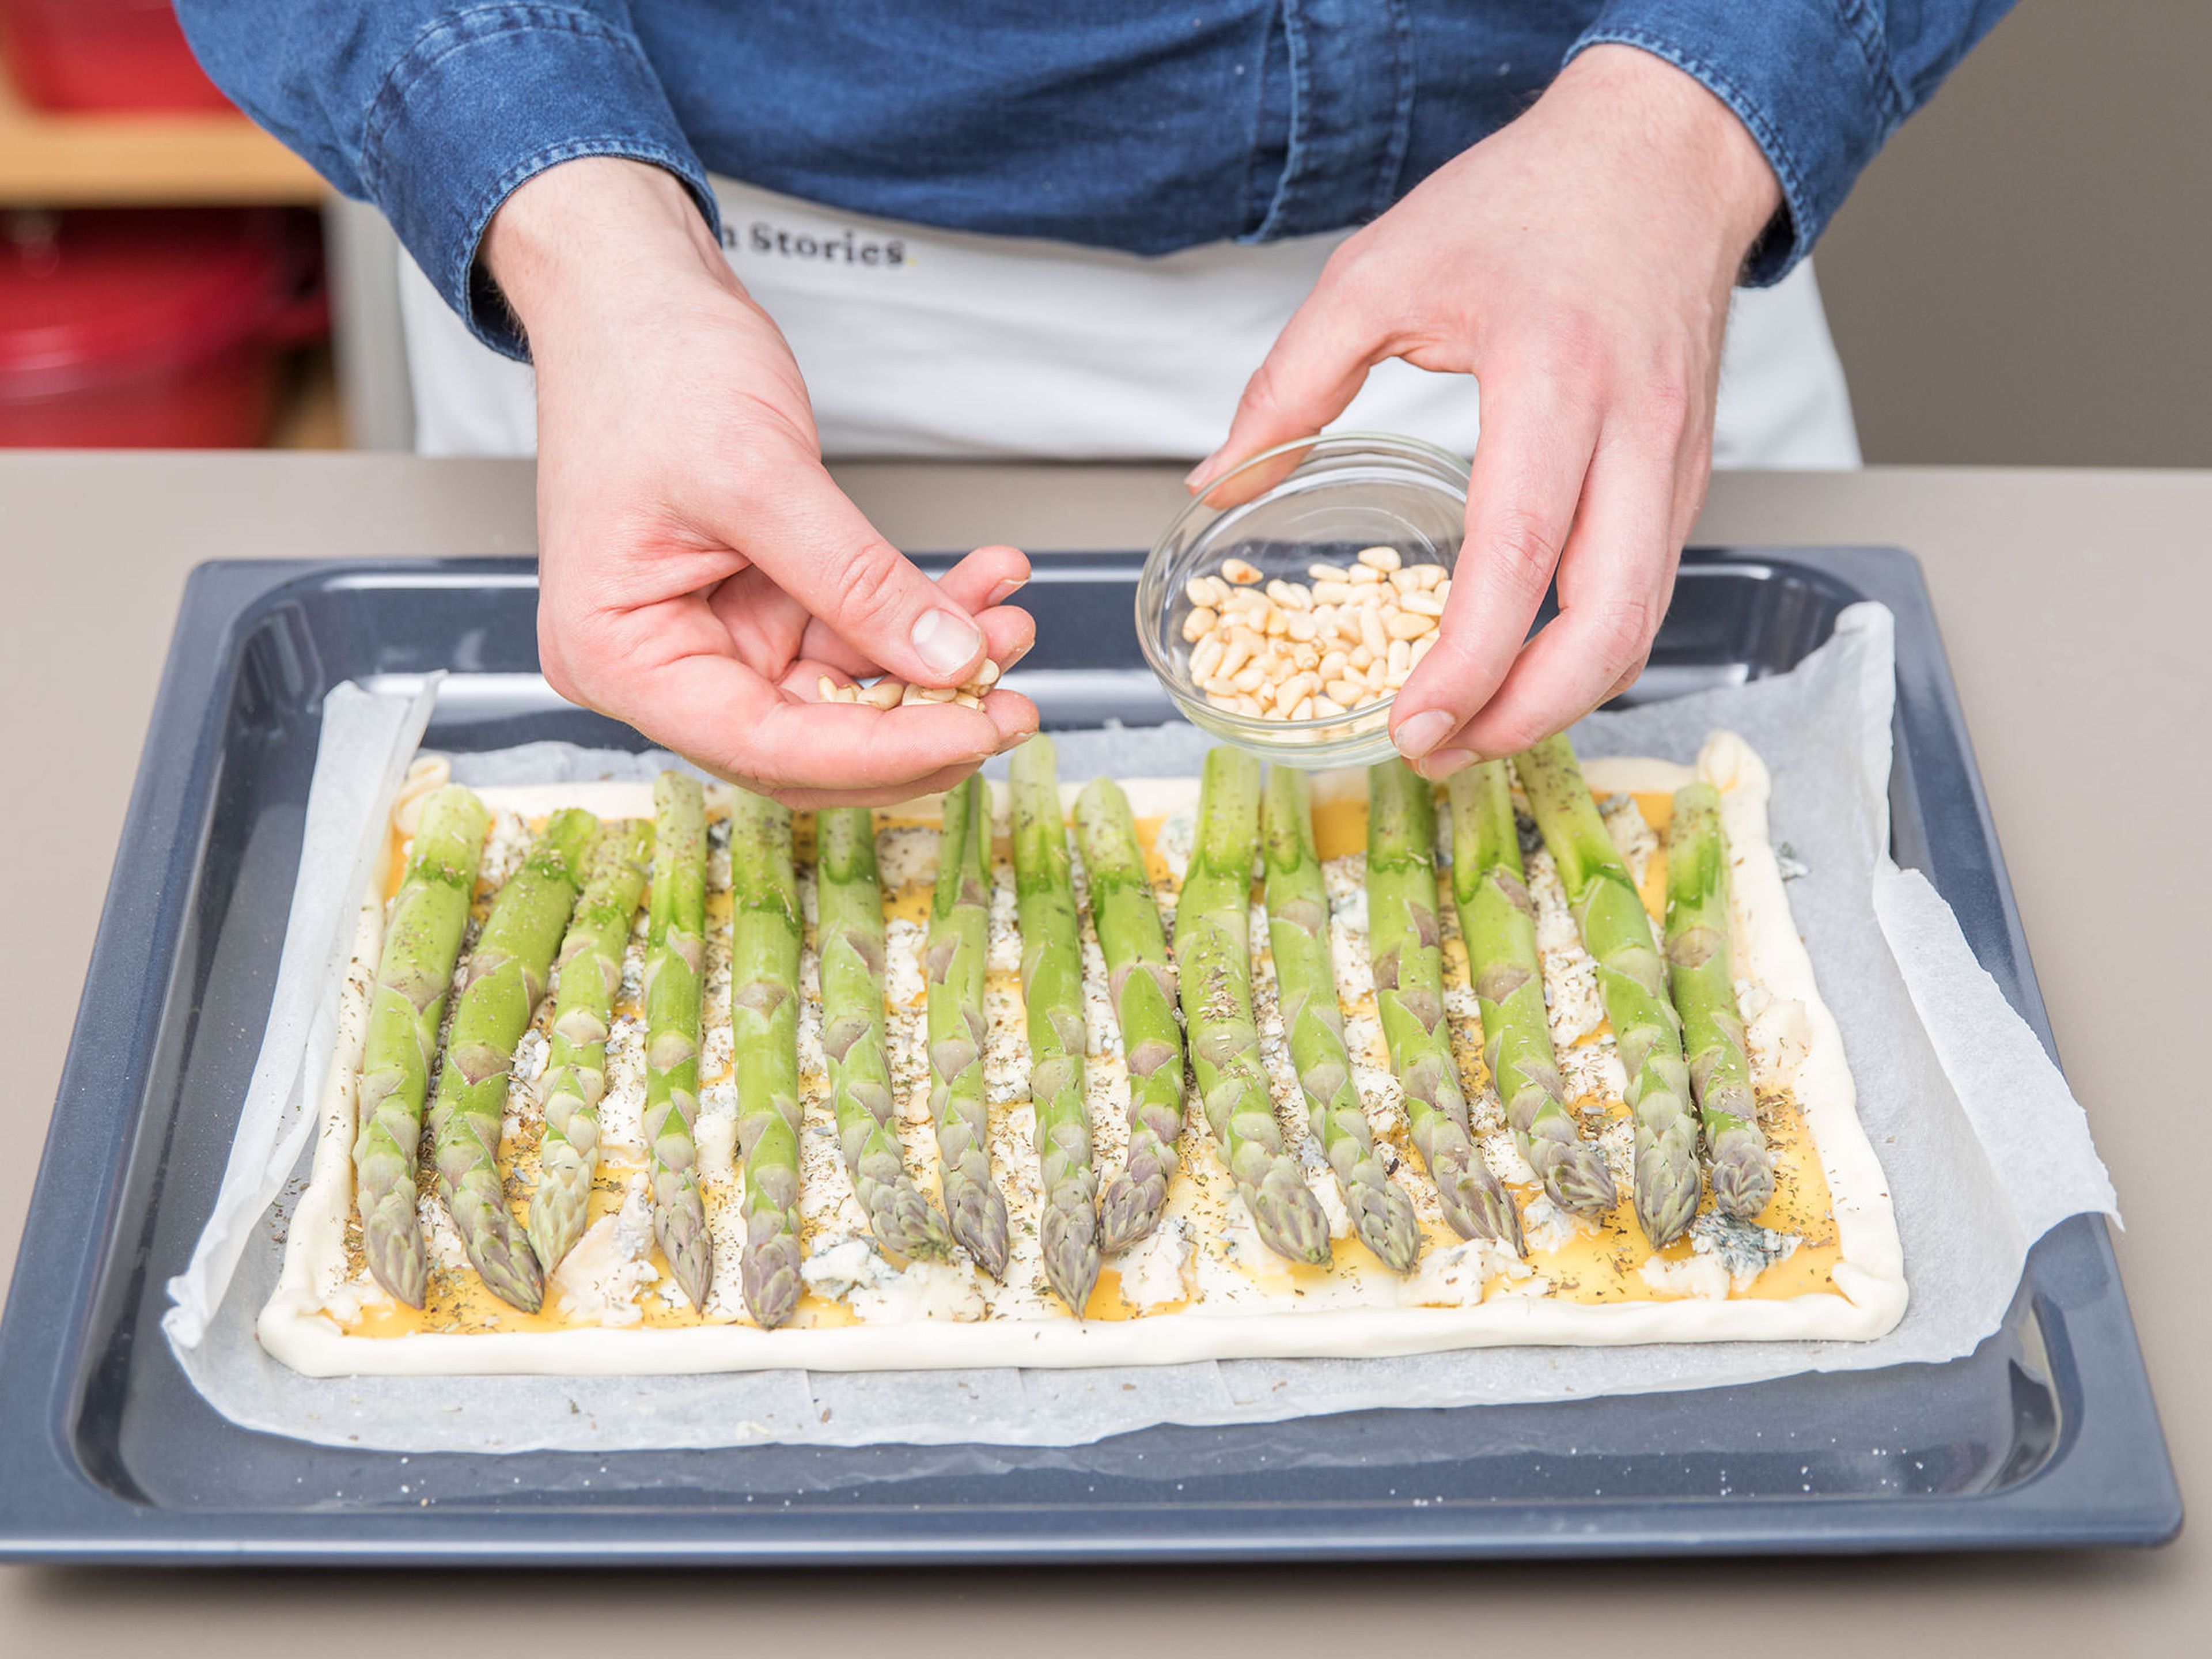 Prepare the asparagus and chop the garlic. Arrange the asparagus on top of the egg layer, then add pine nuts, garlic, herbes de Provence, salt, and pepper. Bake at 180°C/360°F for approx. 20 min. until golden. Enjoy!